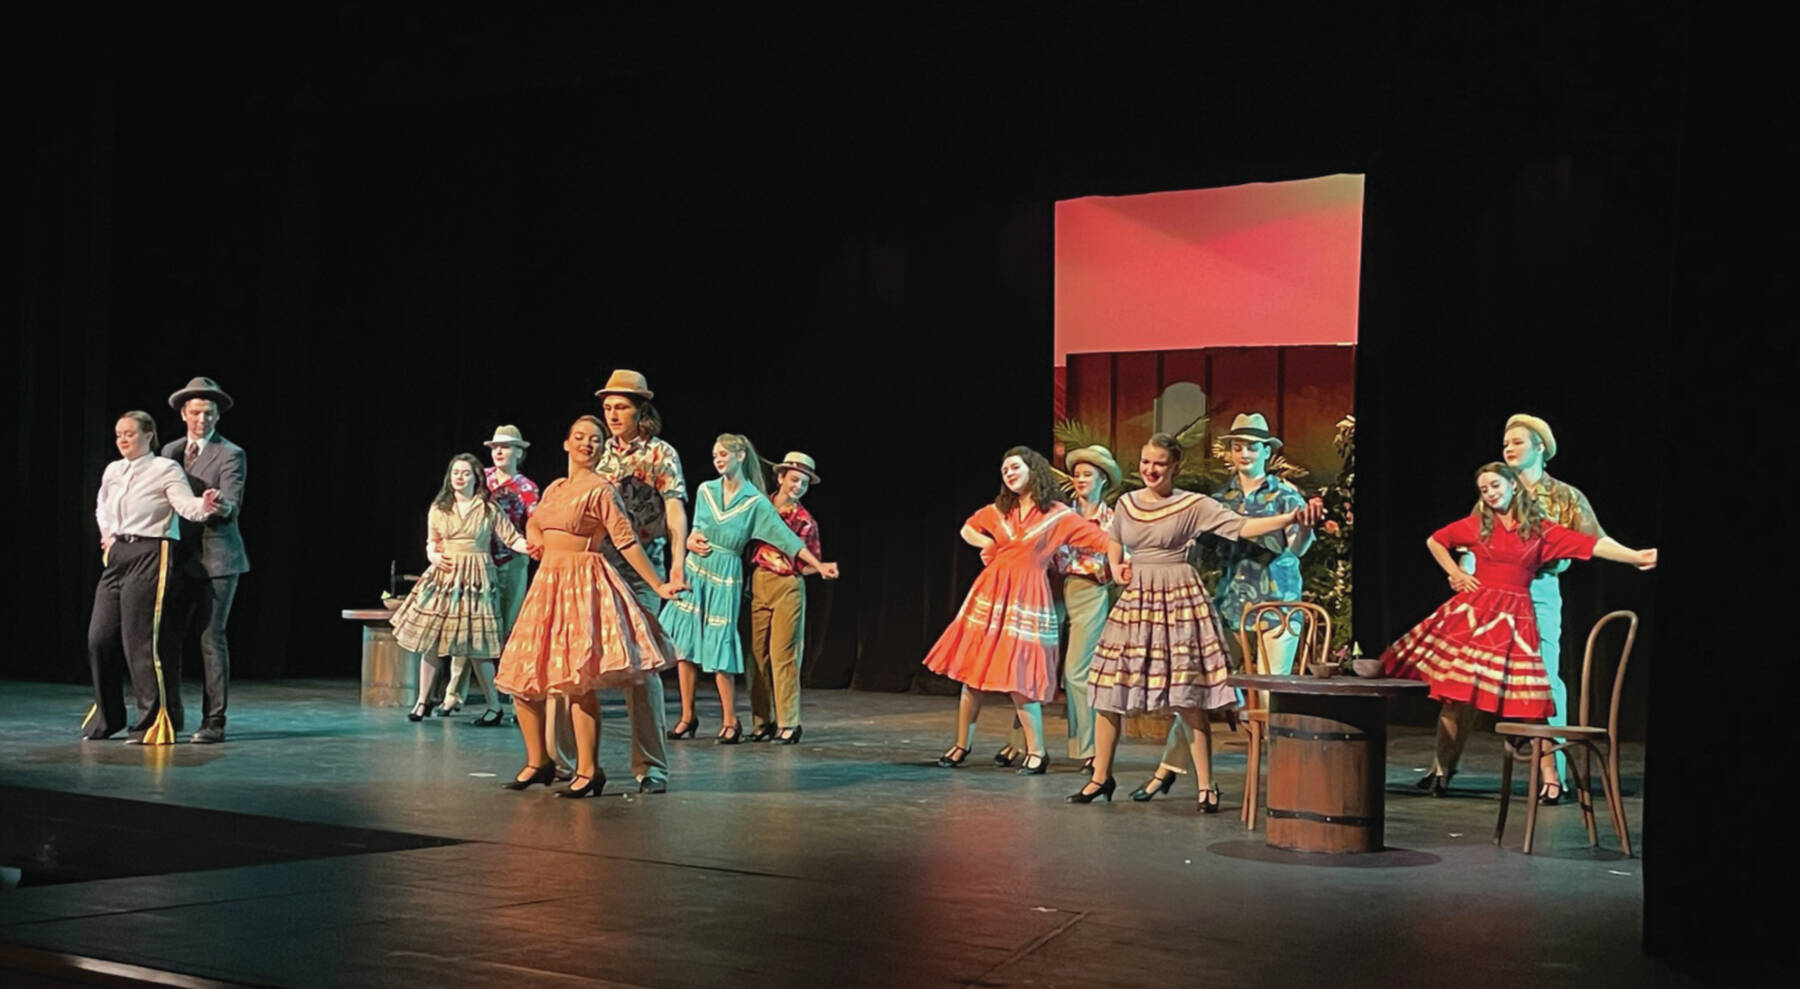 Dancers perform in the Havana scene of “Guys and Dolls” when character Sky Masterson, played by William Bradshaw, takes missionary Sarah Brown, played by Rebecca Trowbridge, to Cuba on a bet. (Photo by Emilie Springer/Homer News)